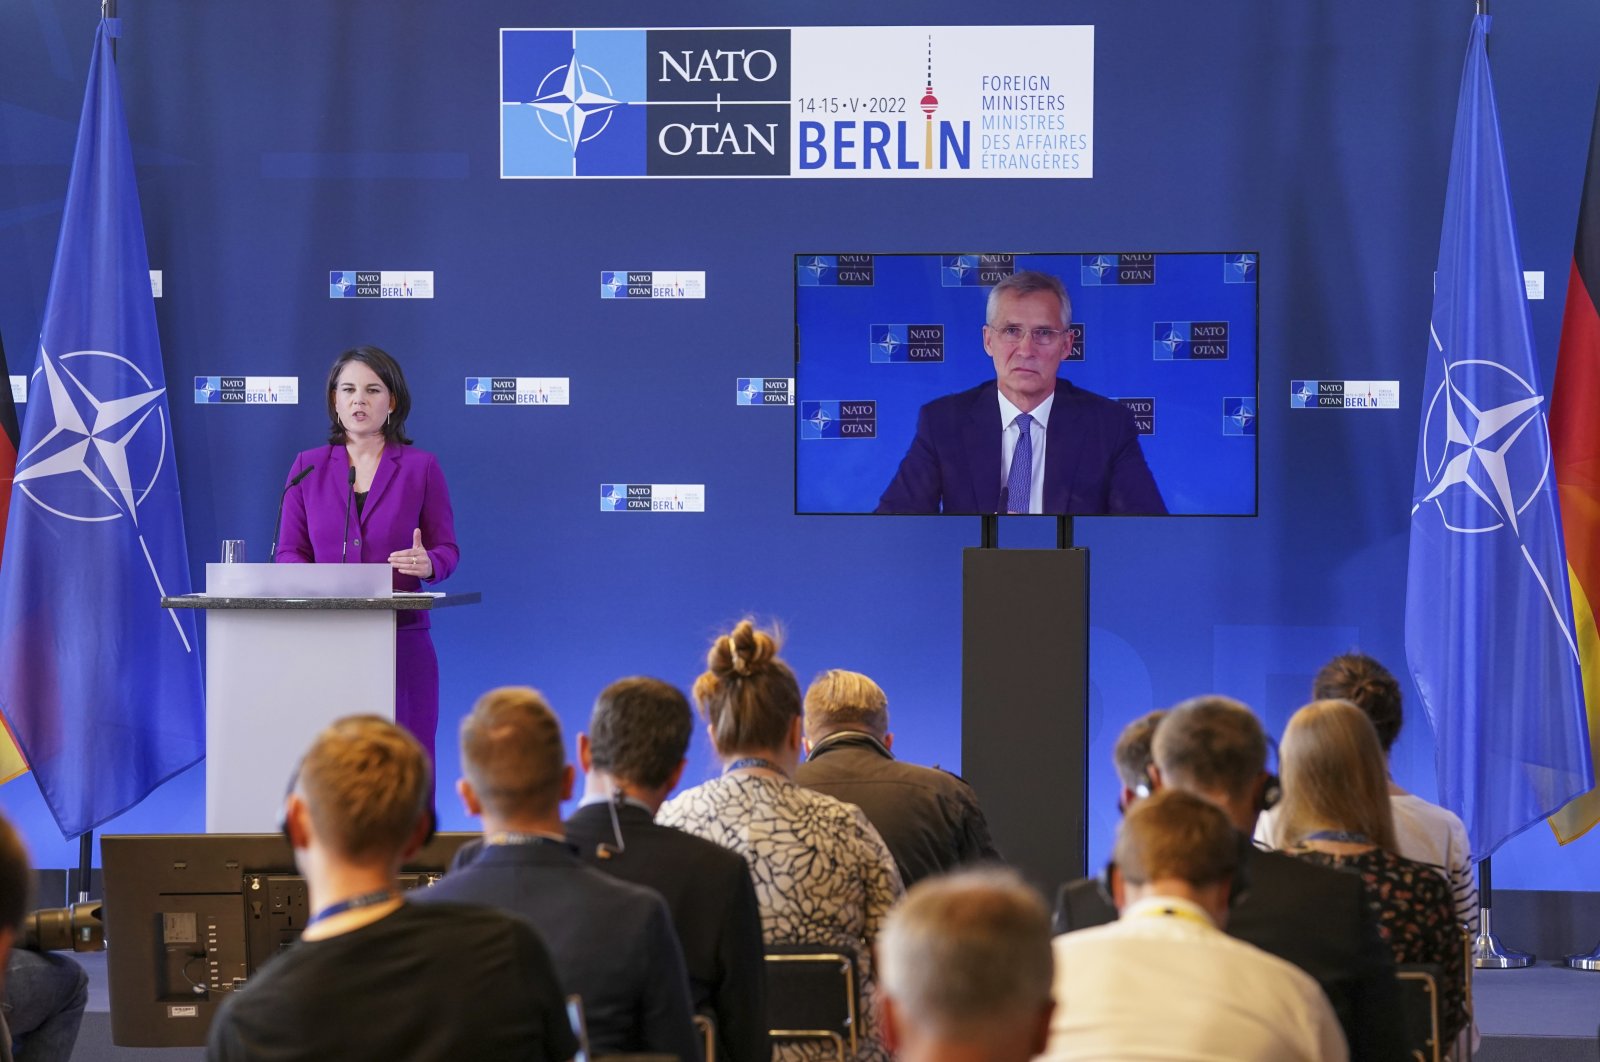 German Foreign Minister Annalena Baerbock speaks during a news conference with NATO Secretary-General Jens Stoltenberg, participating virtually, at a NATO meeting in Berlin, Germany, May 15, 2022. (AP Photo)